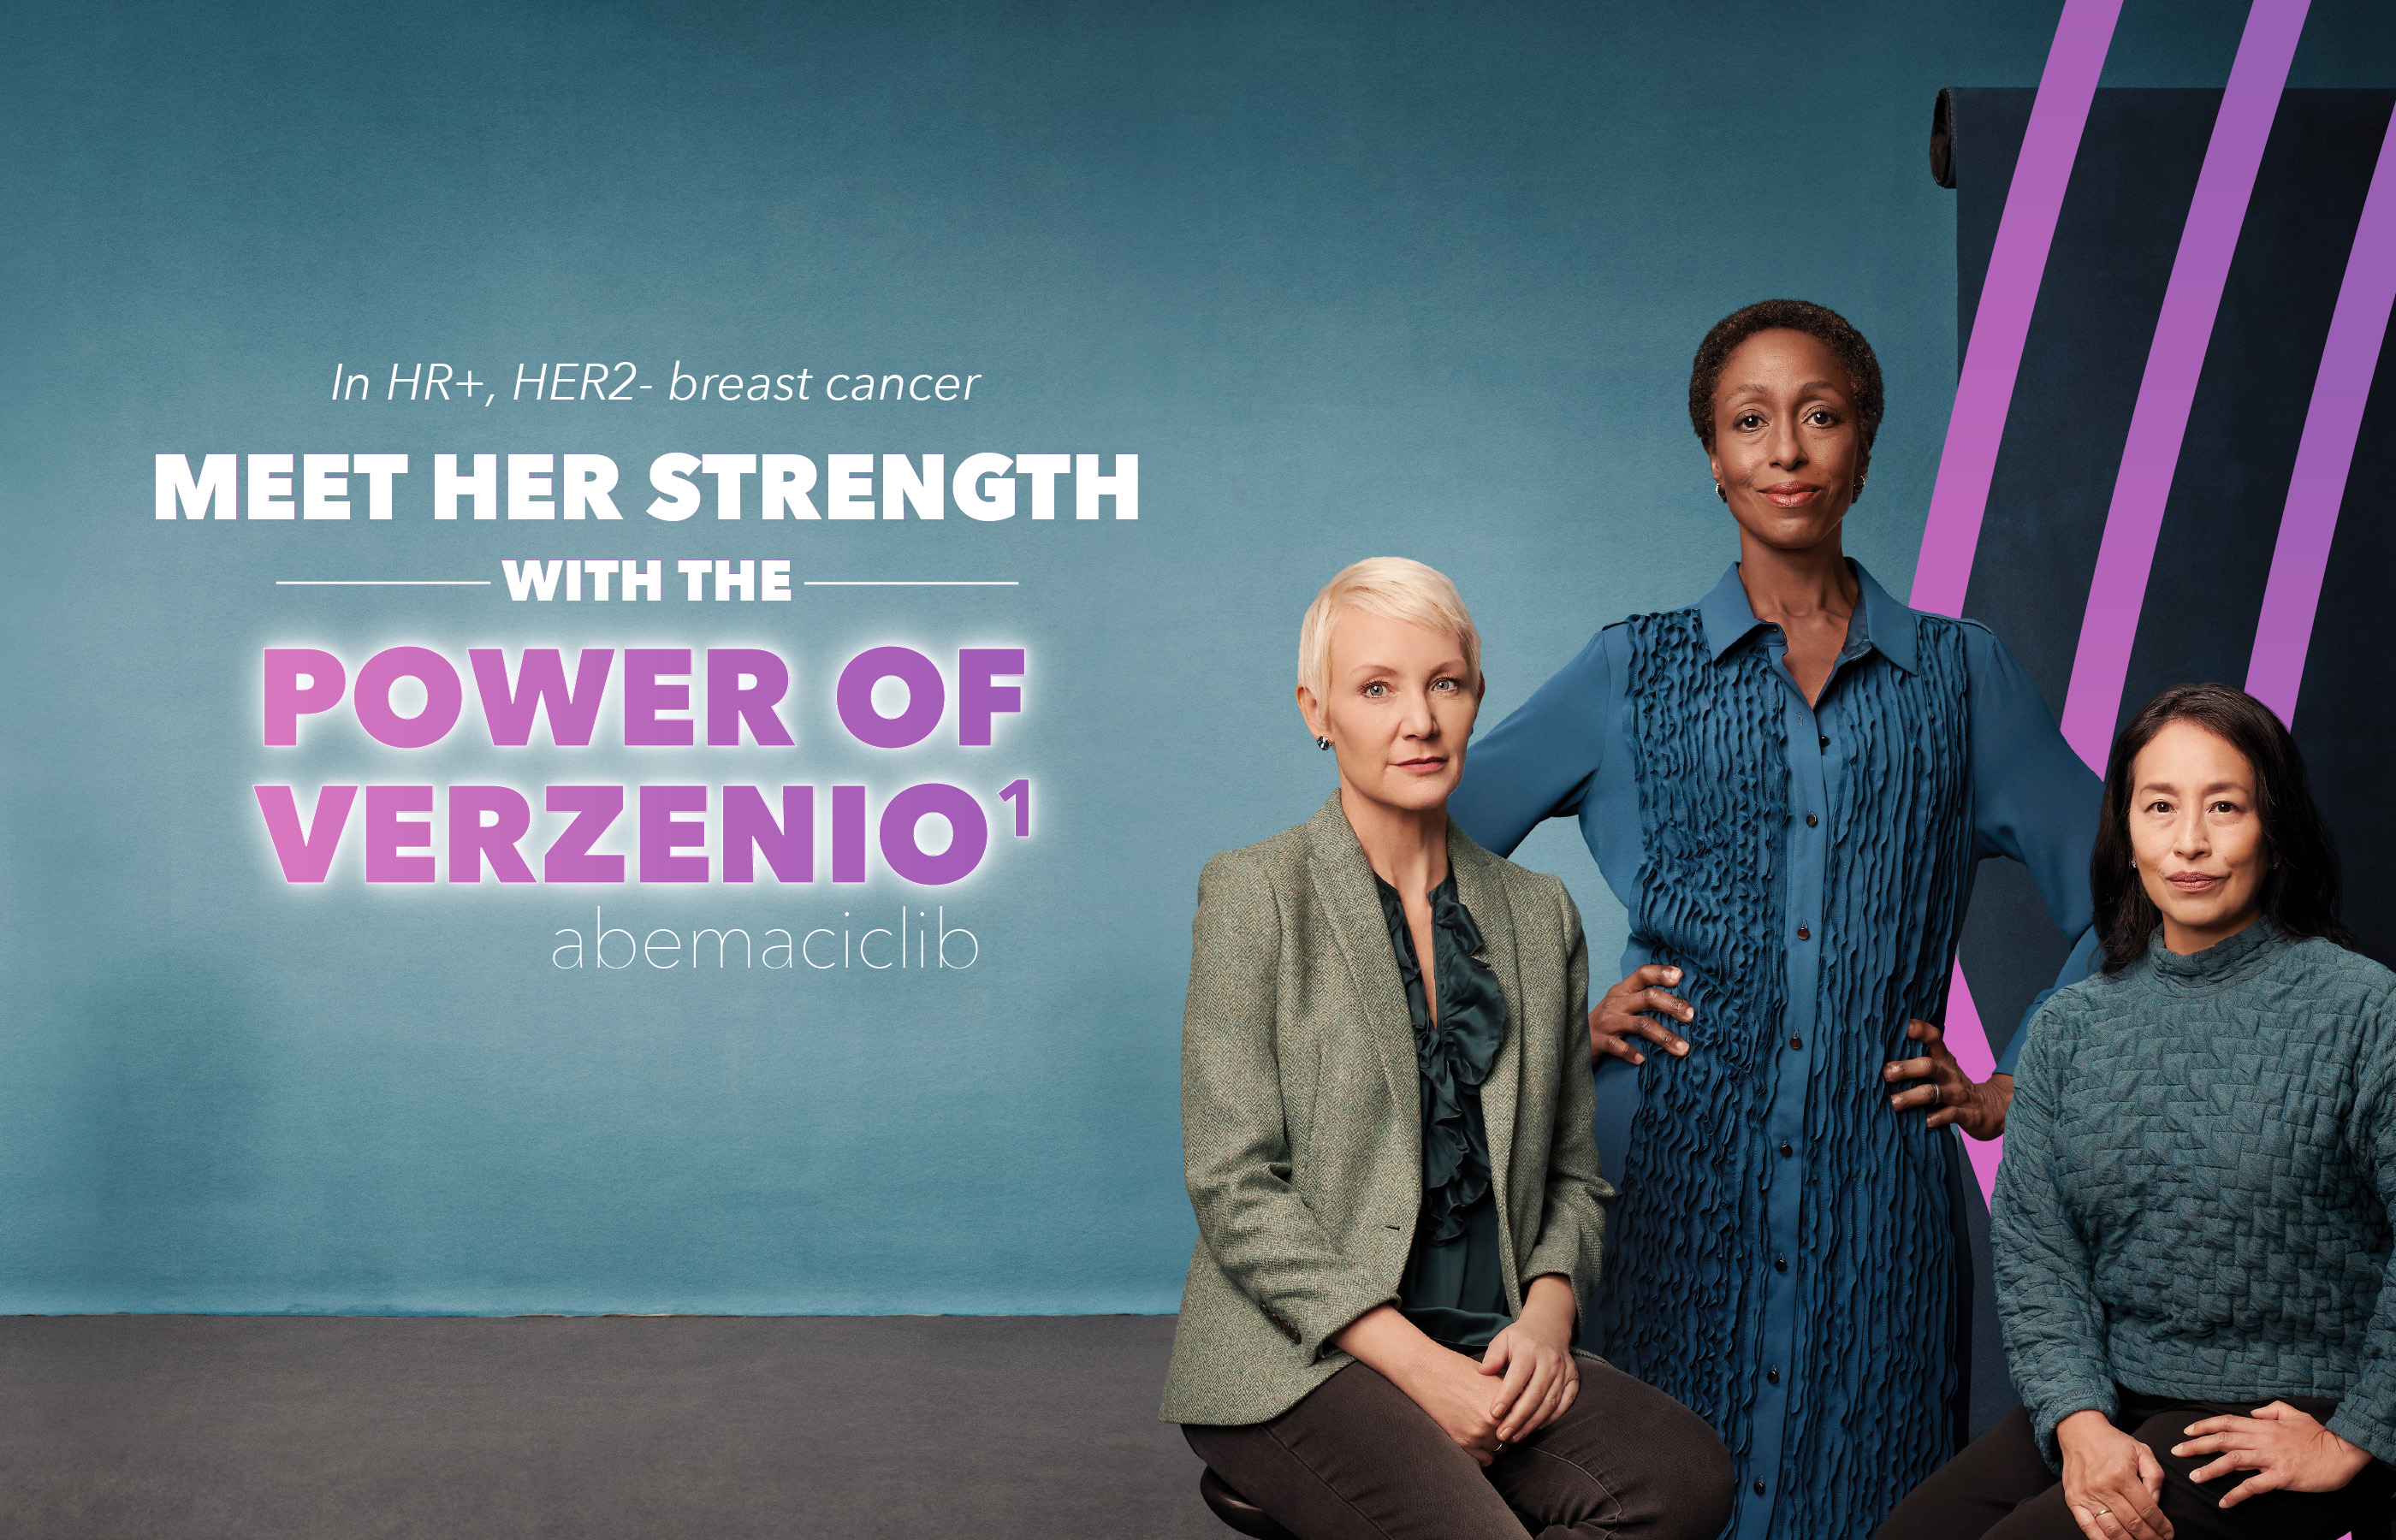 In HR+, HER2- breast cancer, meet her strength with the power of verzenio, abemaciclib